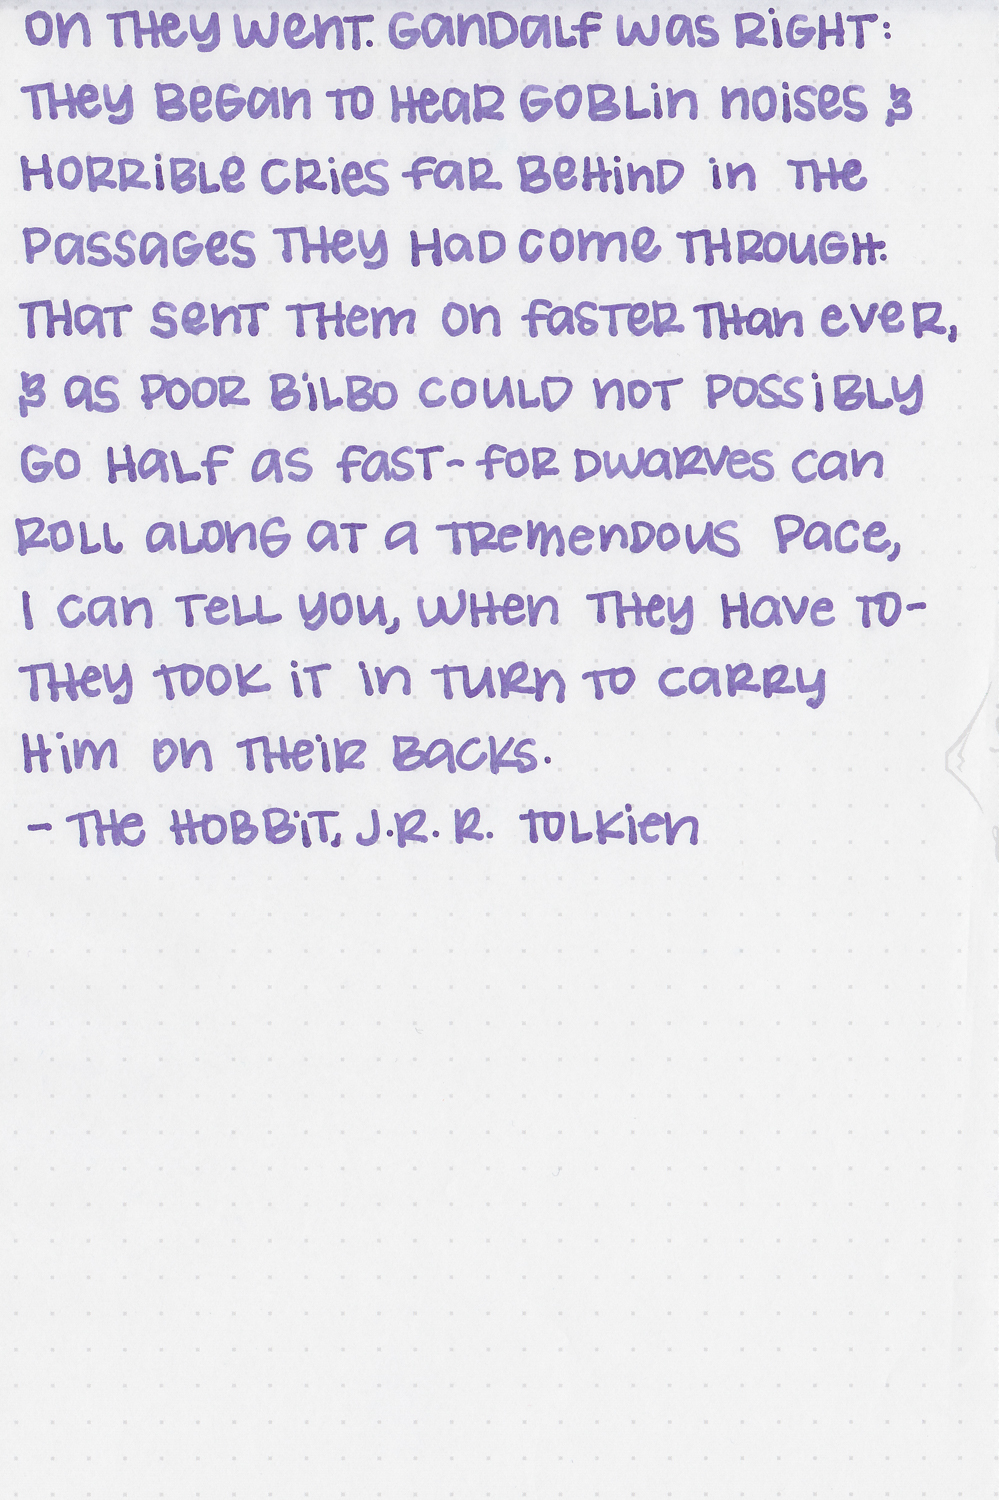 Noodler's Purple Heart - Ink Review - Stationary Journey